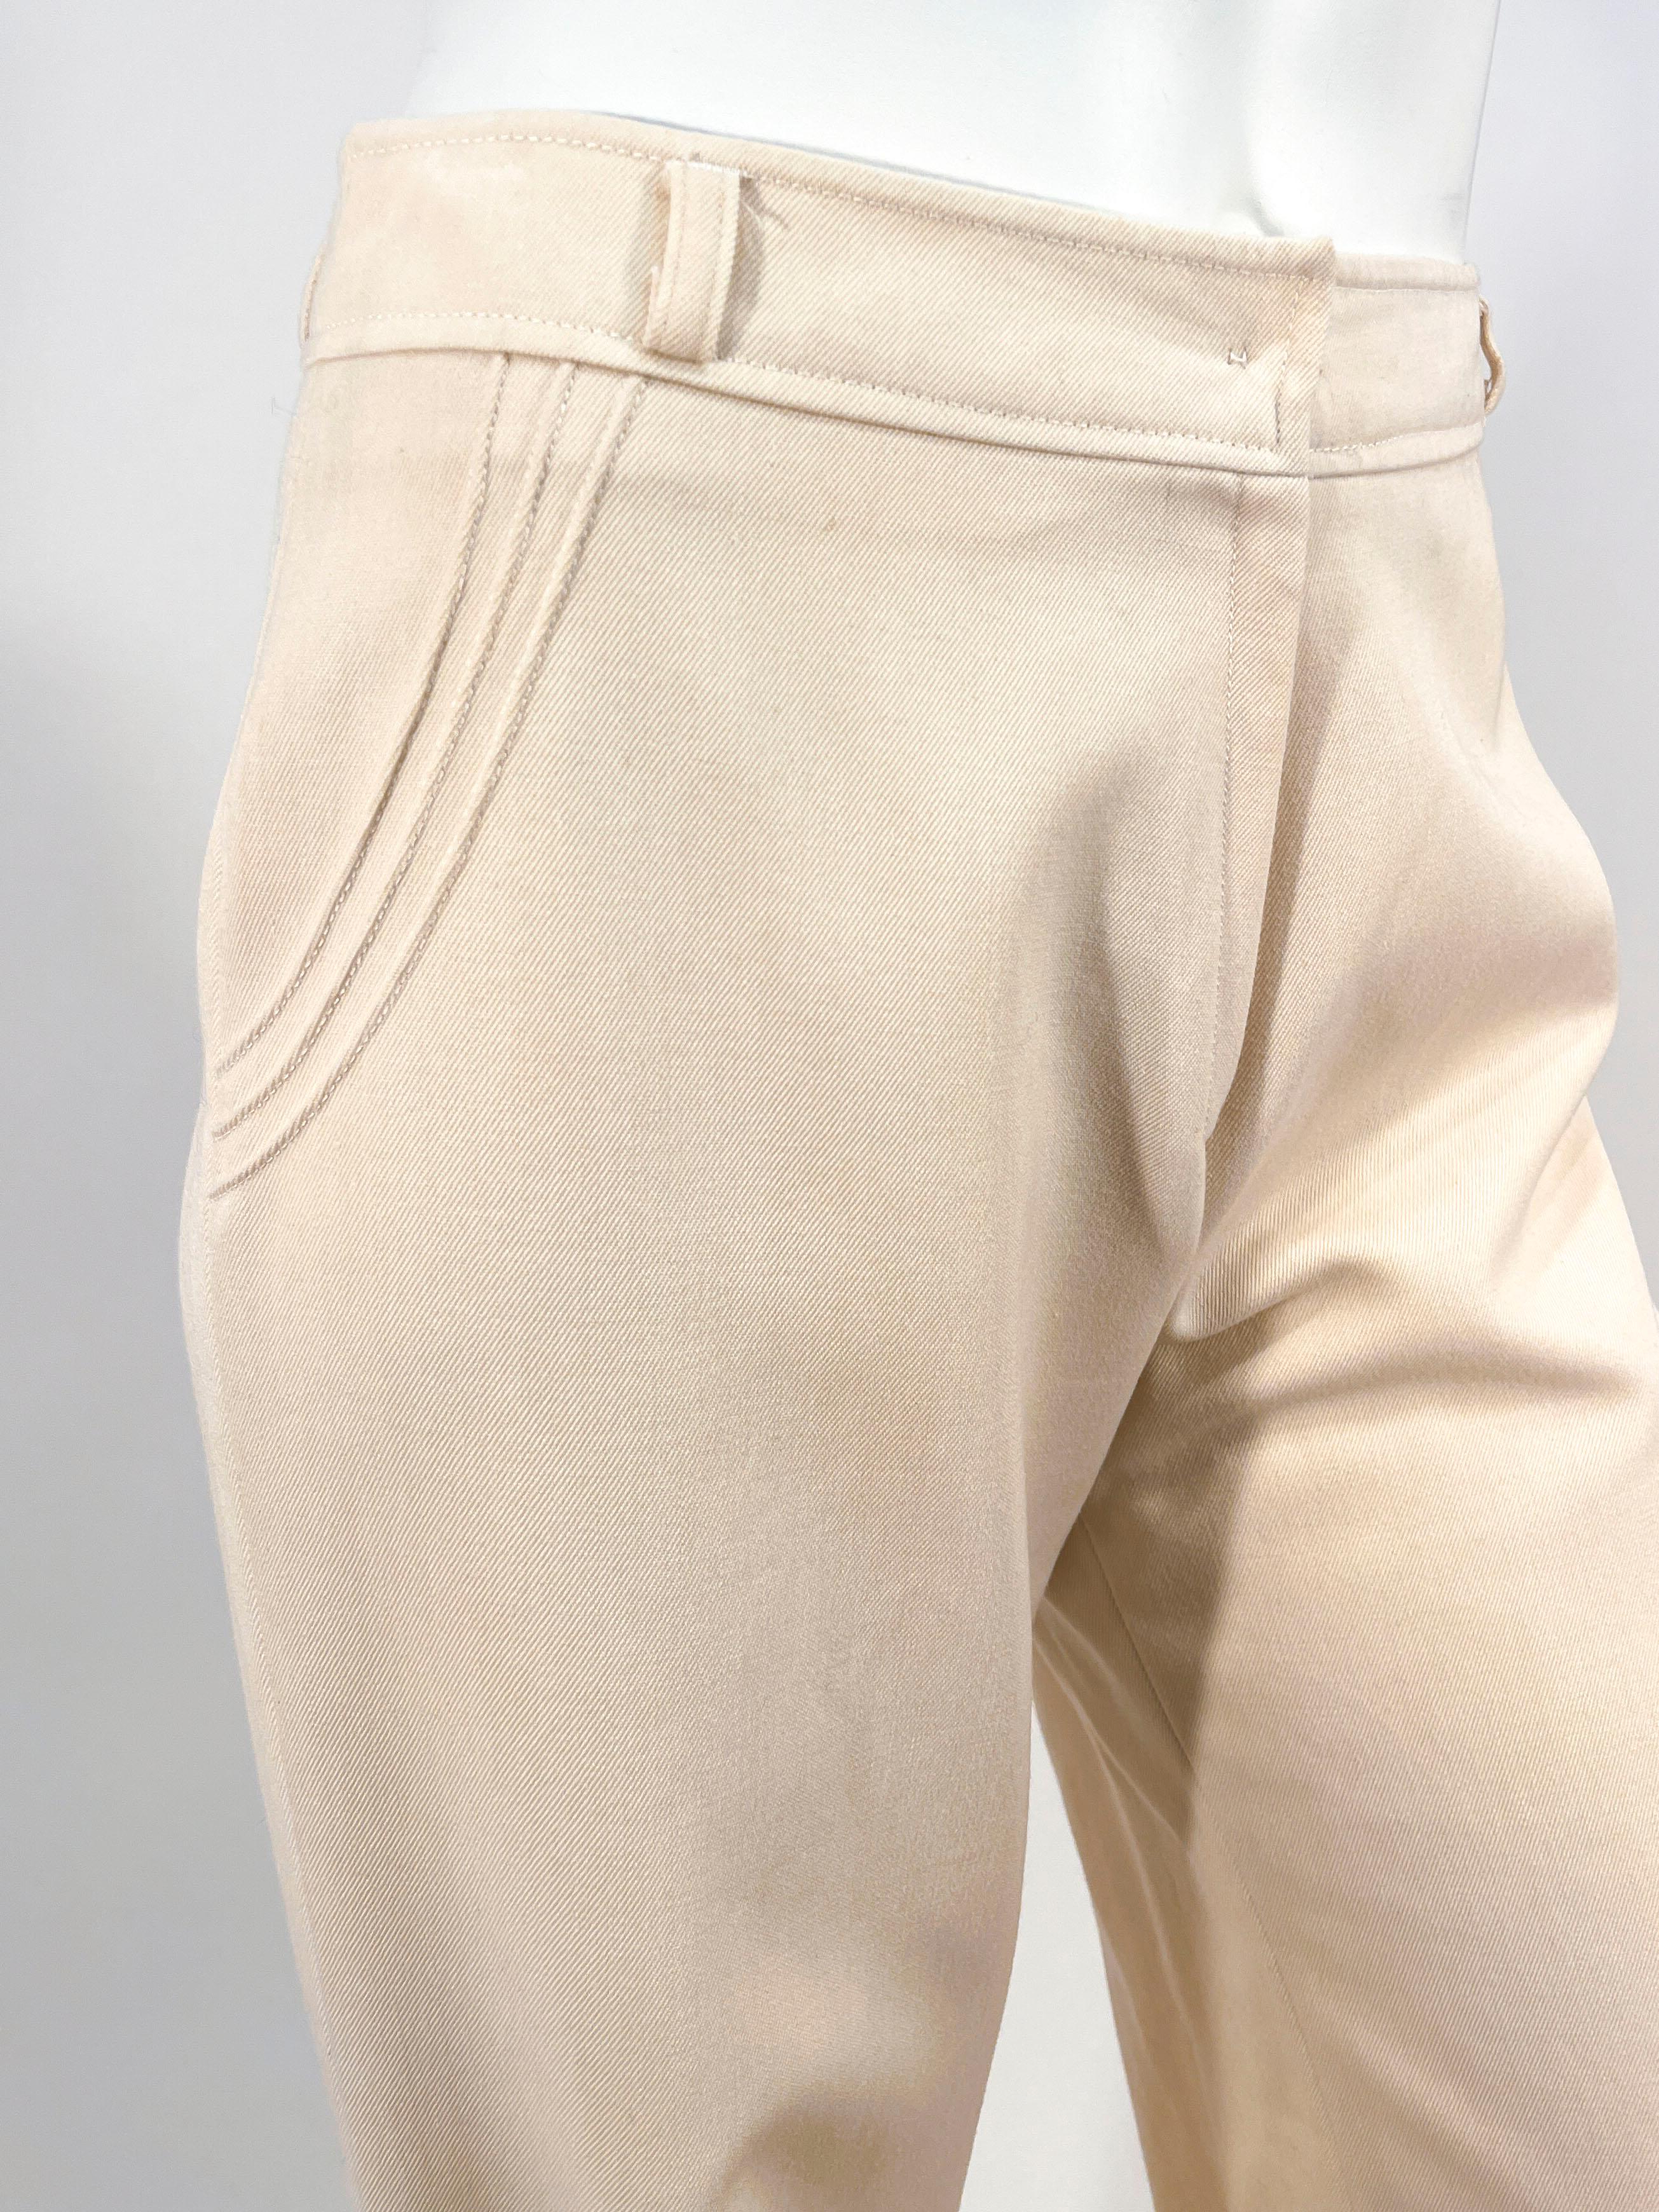 1970s custom made off-white bellbottom pants with faux pocket pin pleats. These are high waisted with belt loops and zip fly. The legs are very wide legged and the textile is a wool blend. 